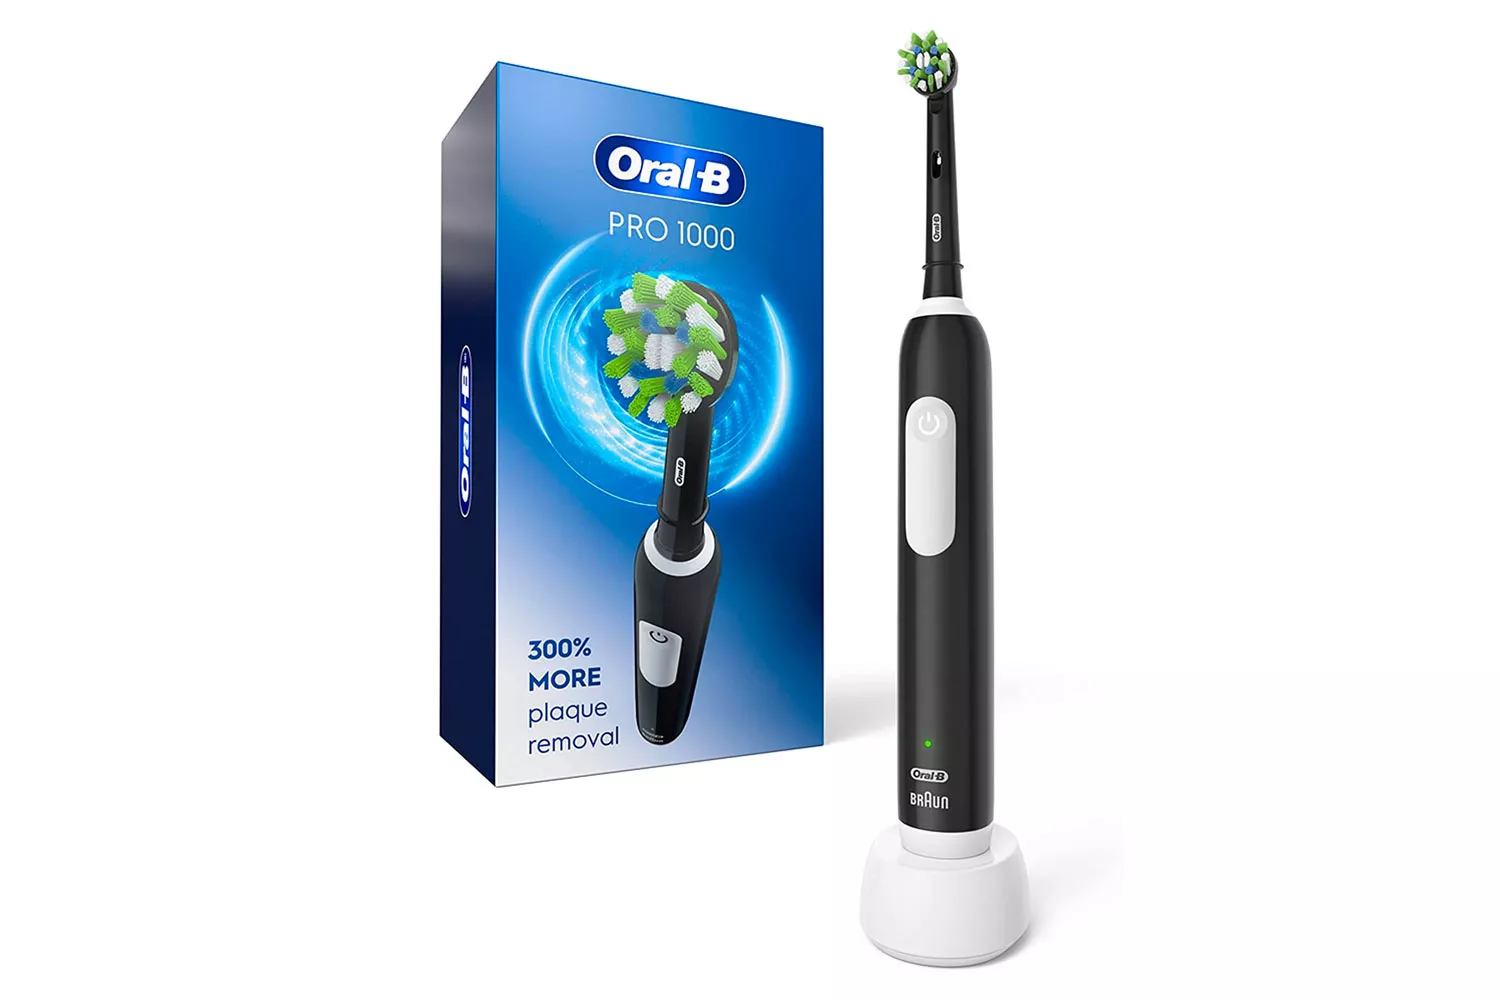 Best SpinningOral-B Pro 1000 Rechargeable Toothbrush